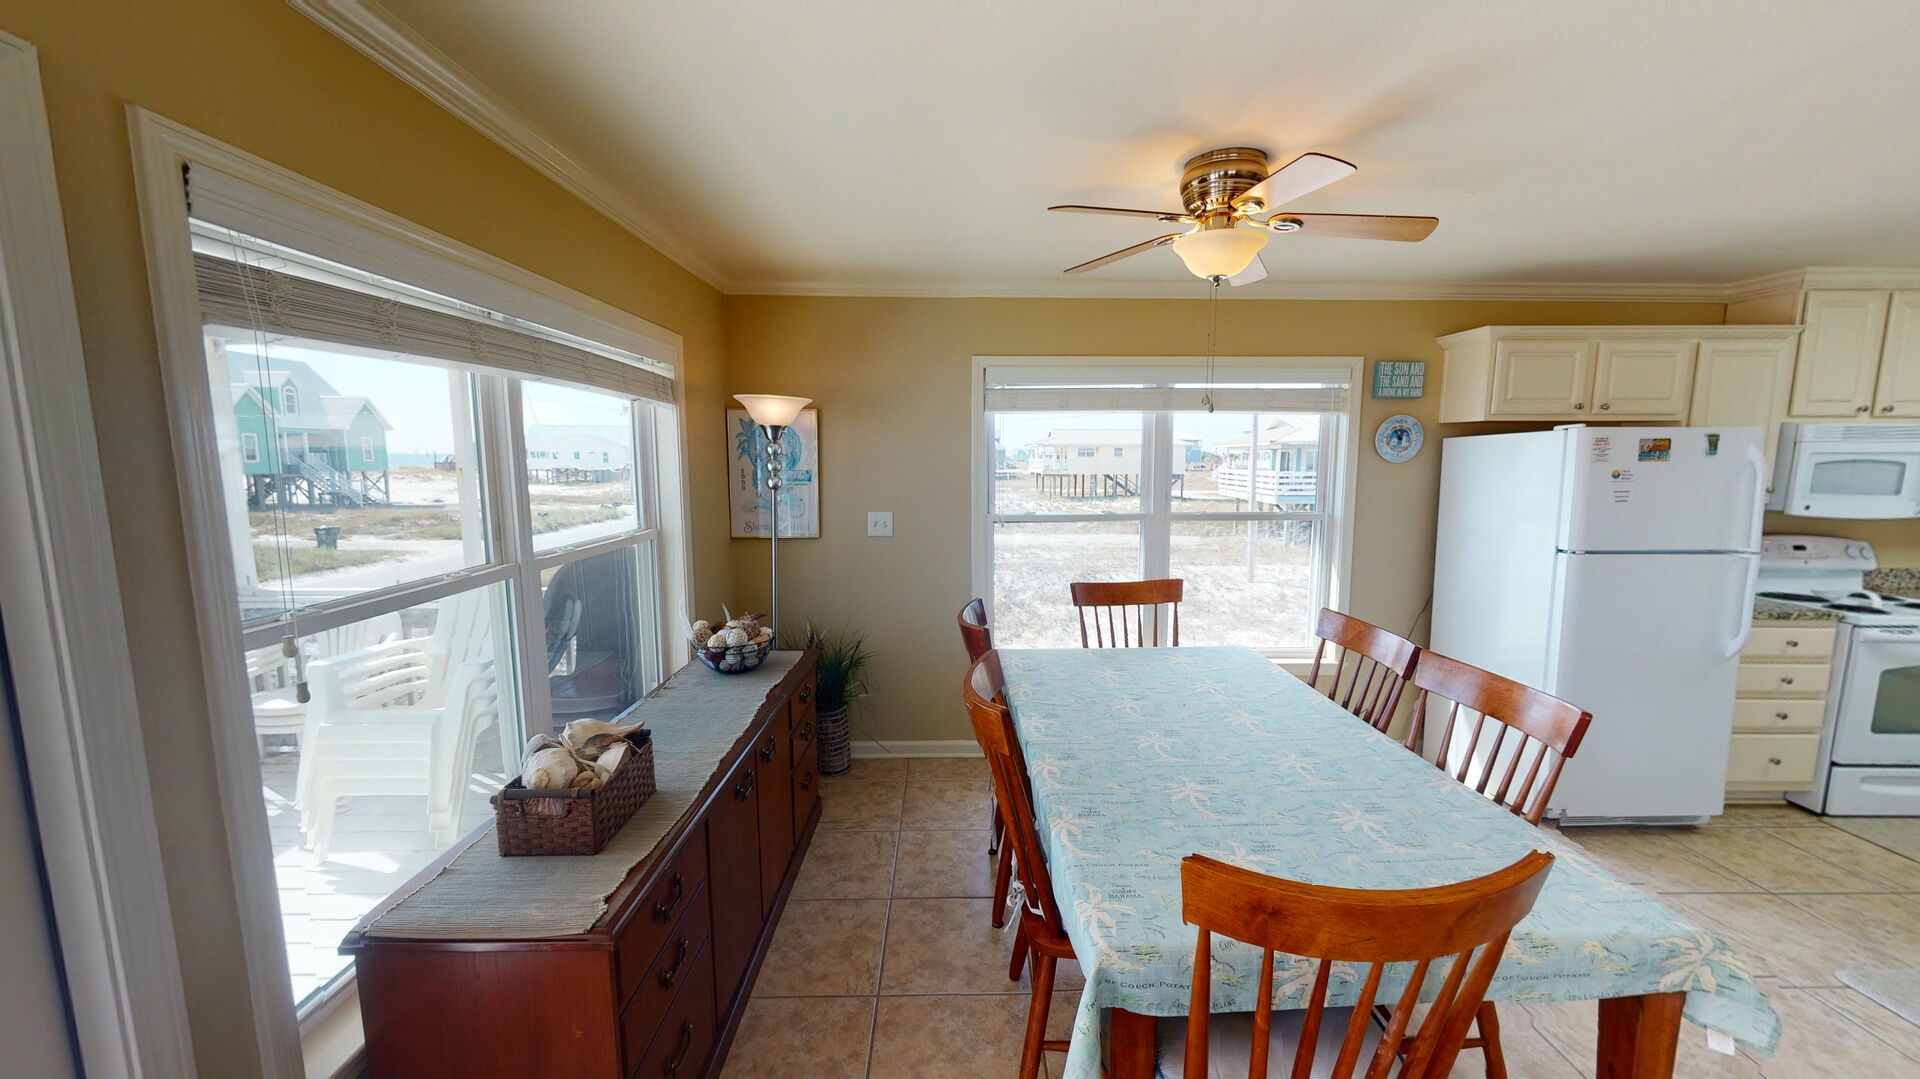 The dining room sits 6 with a sideboard to set up a family buffet